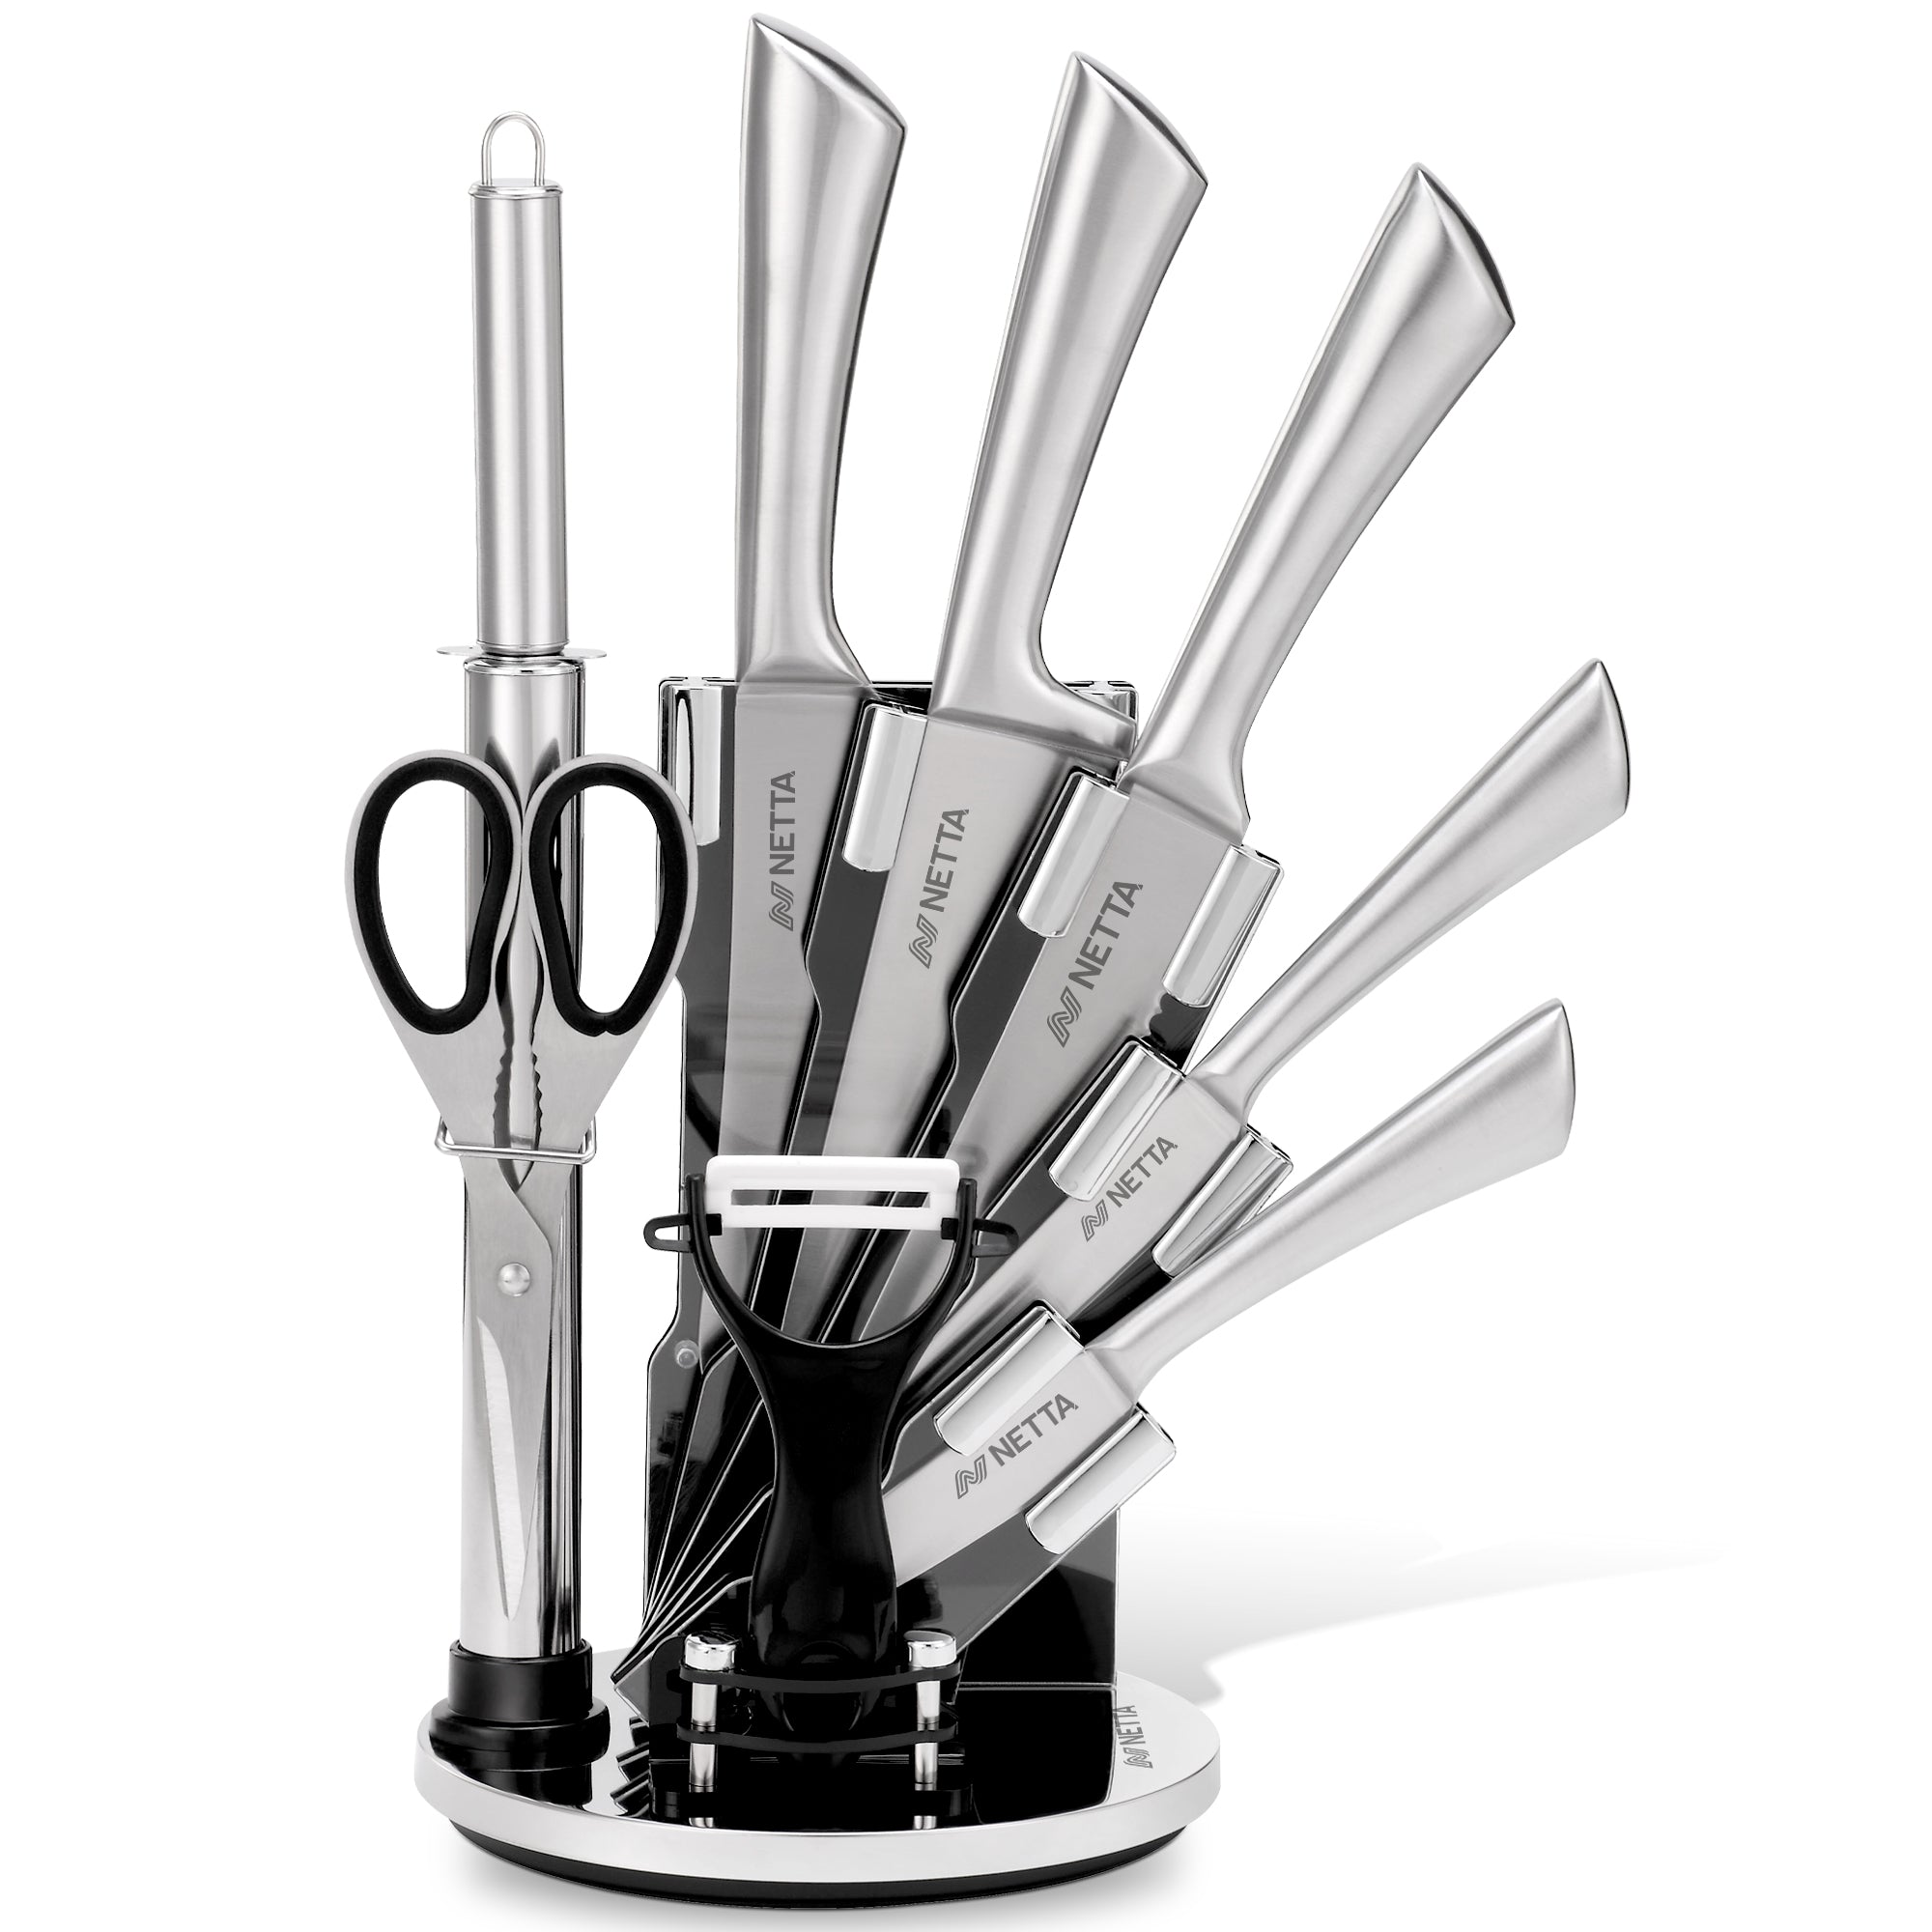 NETTA 8 Piece Stainless Steel Knife Set with Revolving Stand